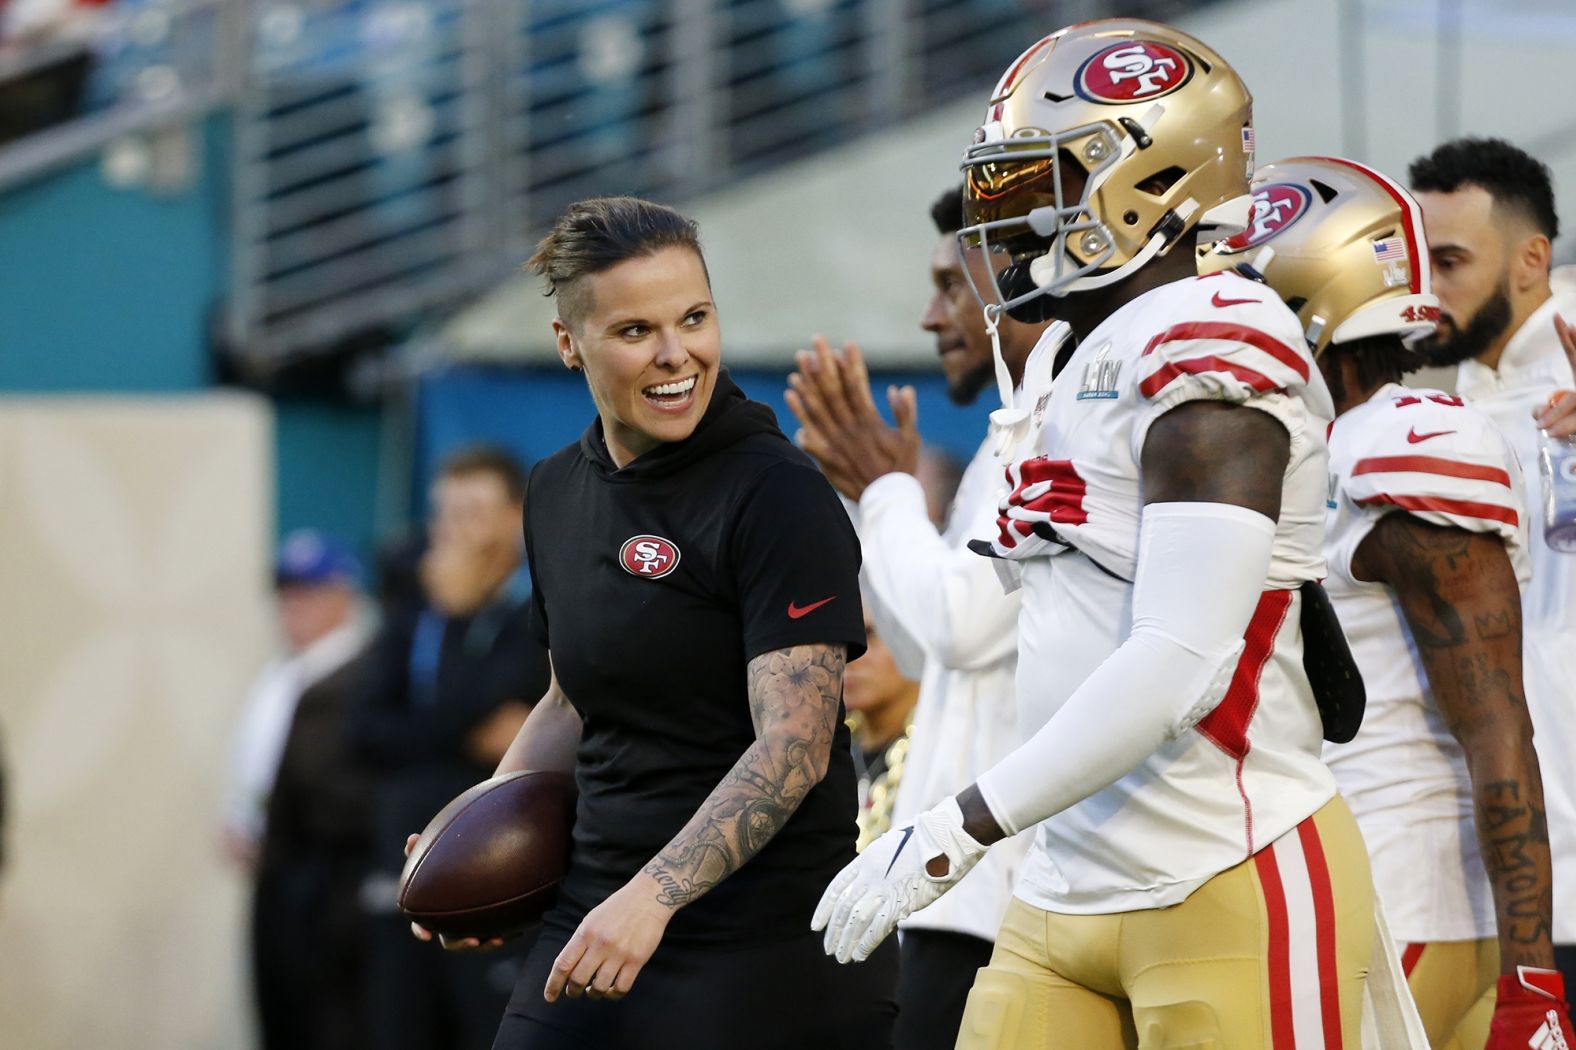 San Francisco 49ers offensive assistant Katie Sowers always dreamed of coaching in the NFL. And when she walked into Hard Rock Stadium in Miami Gardens, Florida, on February 2, 2020,  she made history as the first woman and openly gay person to coach in a Super Bowl. "My long-term goal is to be a head coach and then move on to executive management," she said in a <a href="https://www.hesston.edu/2016/05/love-game-hesston-native-make-nfl-coaching-debut/" target="_blank" target="_blank">2016 interview.</a> "It's not a typical path, but then again, nothing about what I'm doing is typical."